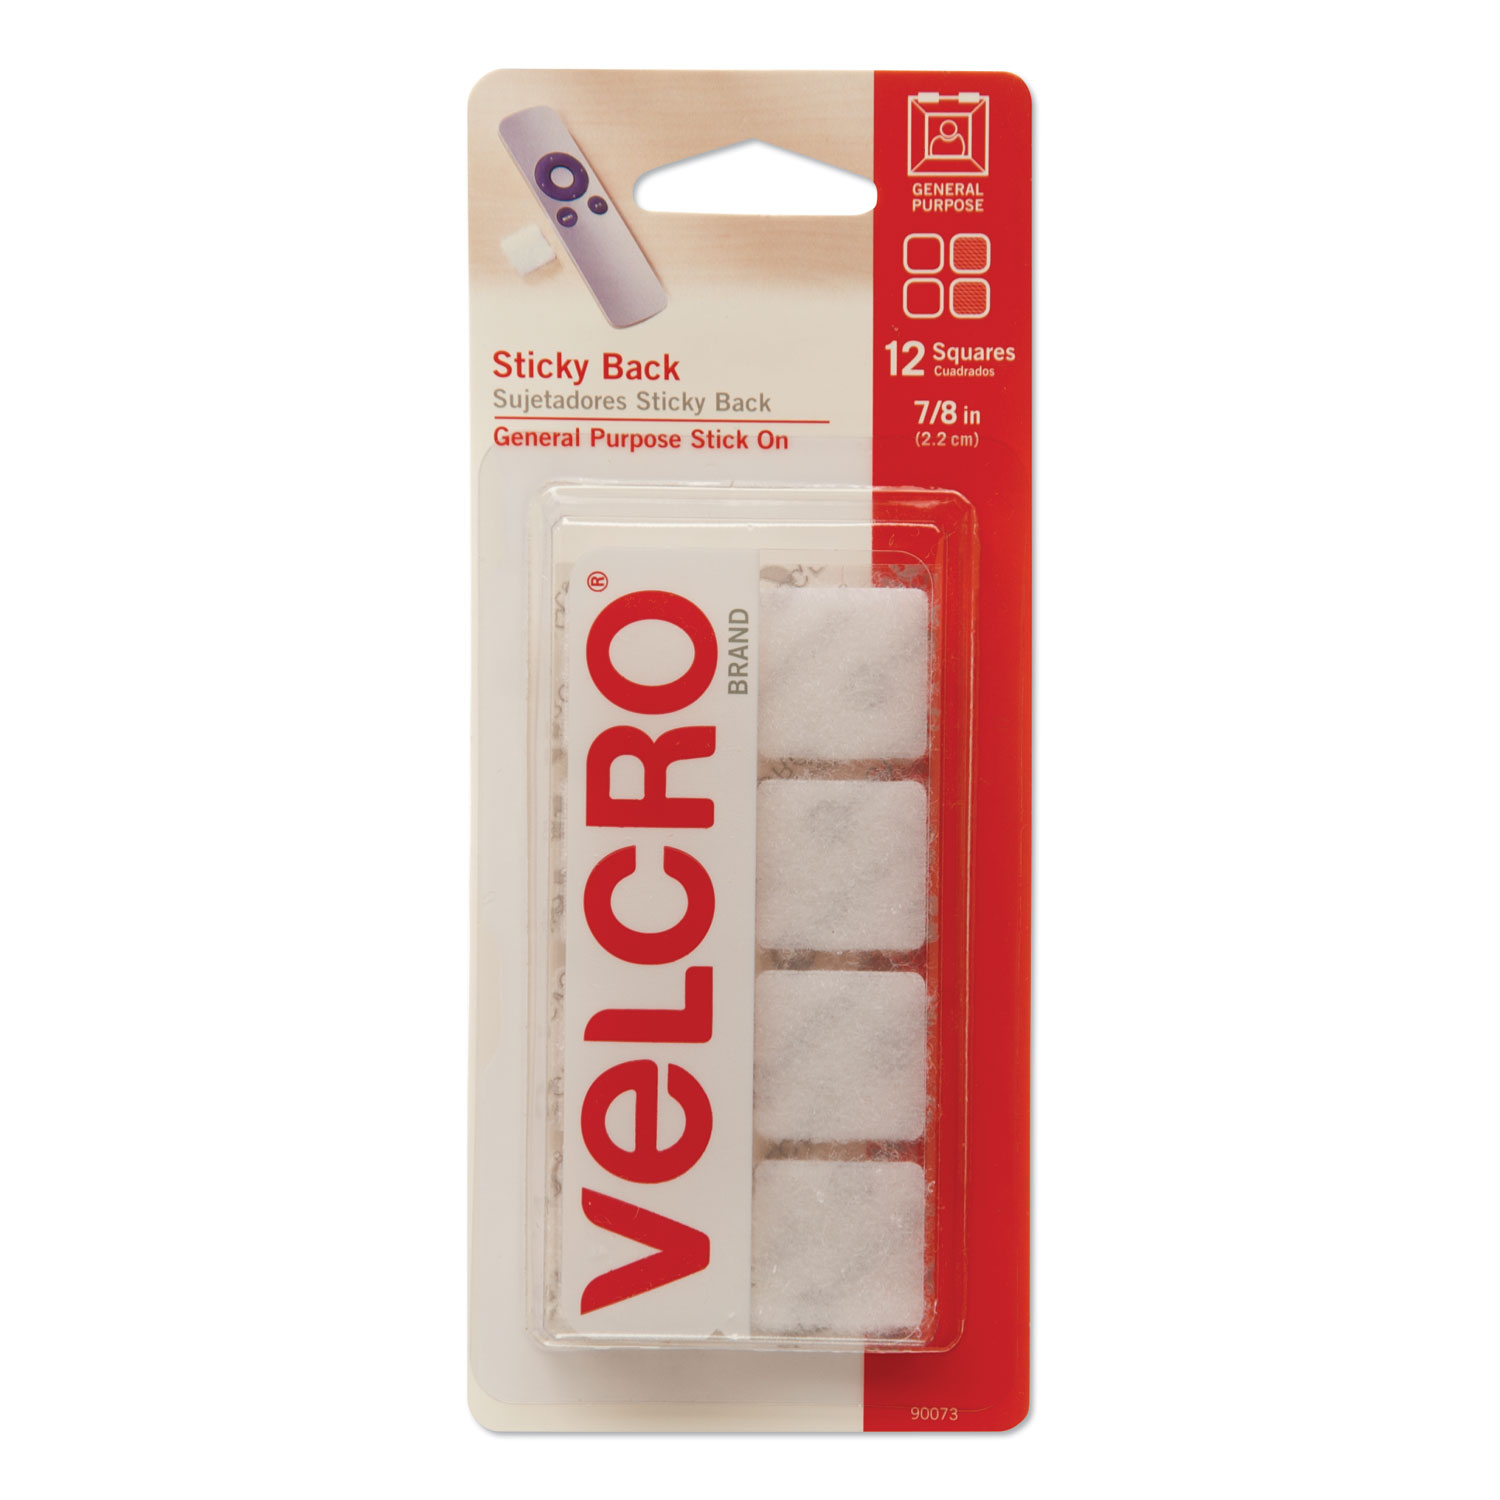  VELCRO Brand 90073 Sticky-Back Fasteners, Removable Adhesive, 0.88 x 0.88, White, 12/Pack (VEK90073) 